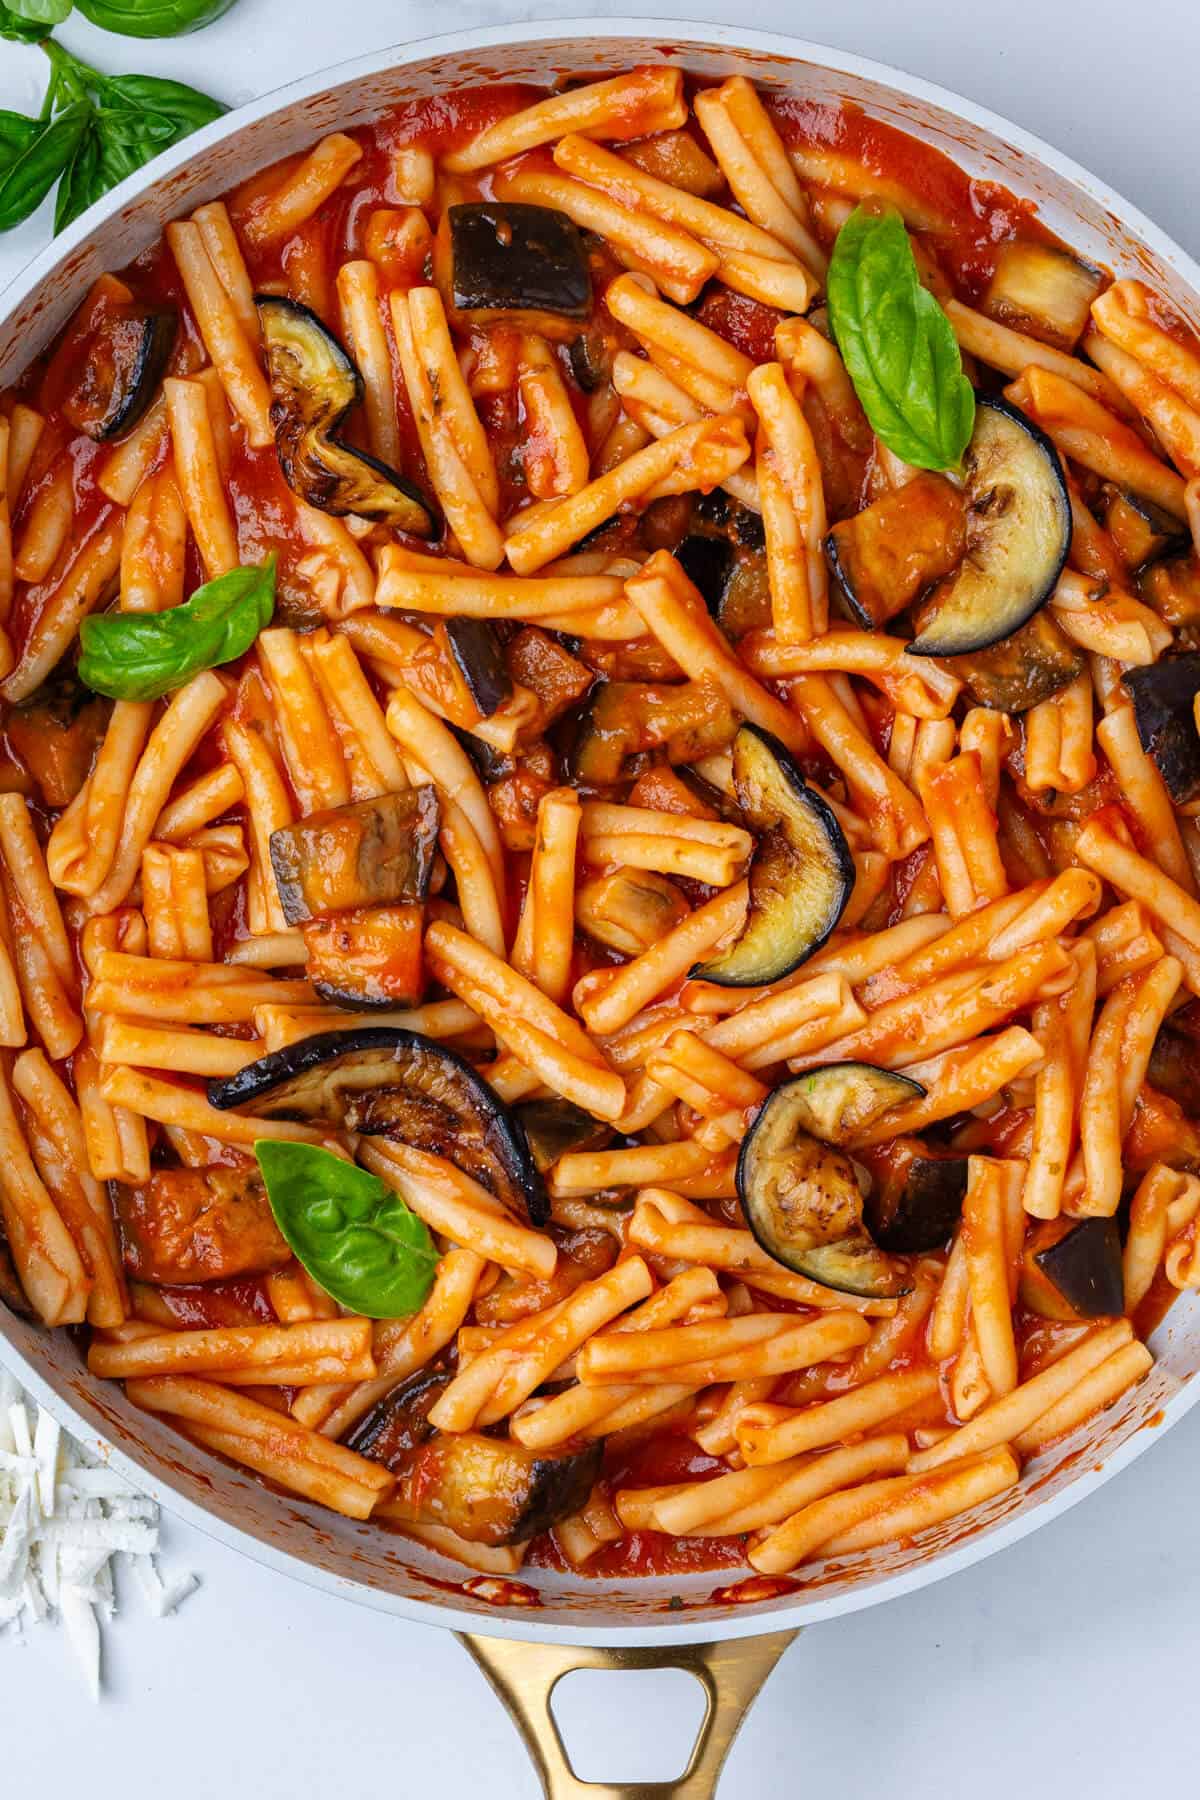 Pan full of pasta alla norma with fresh basil on top